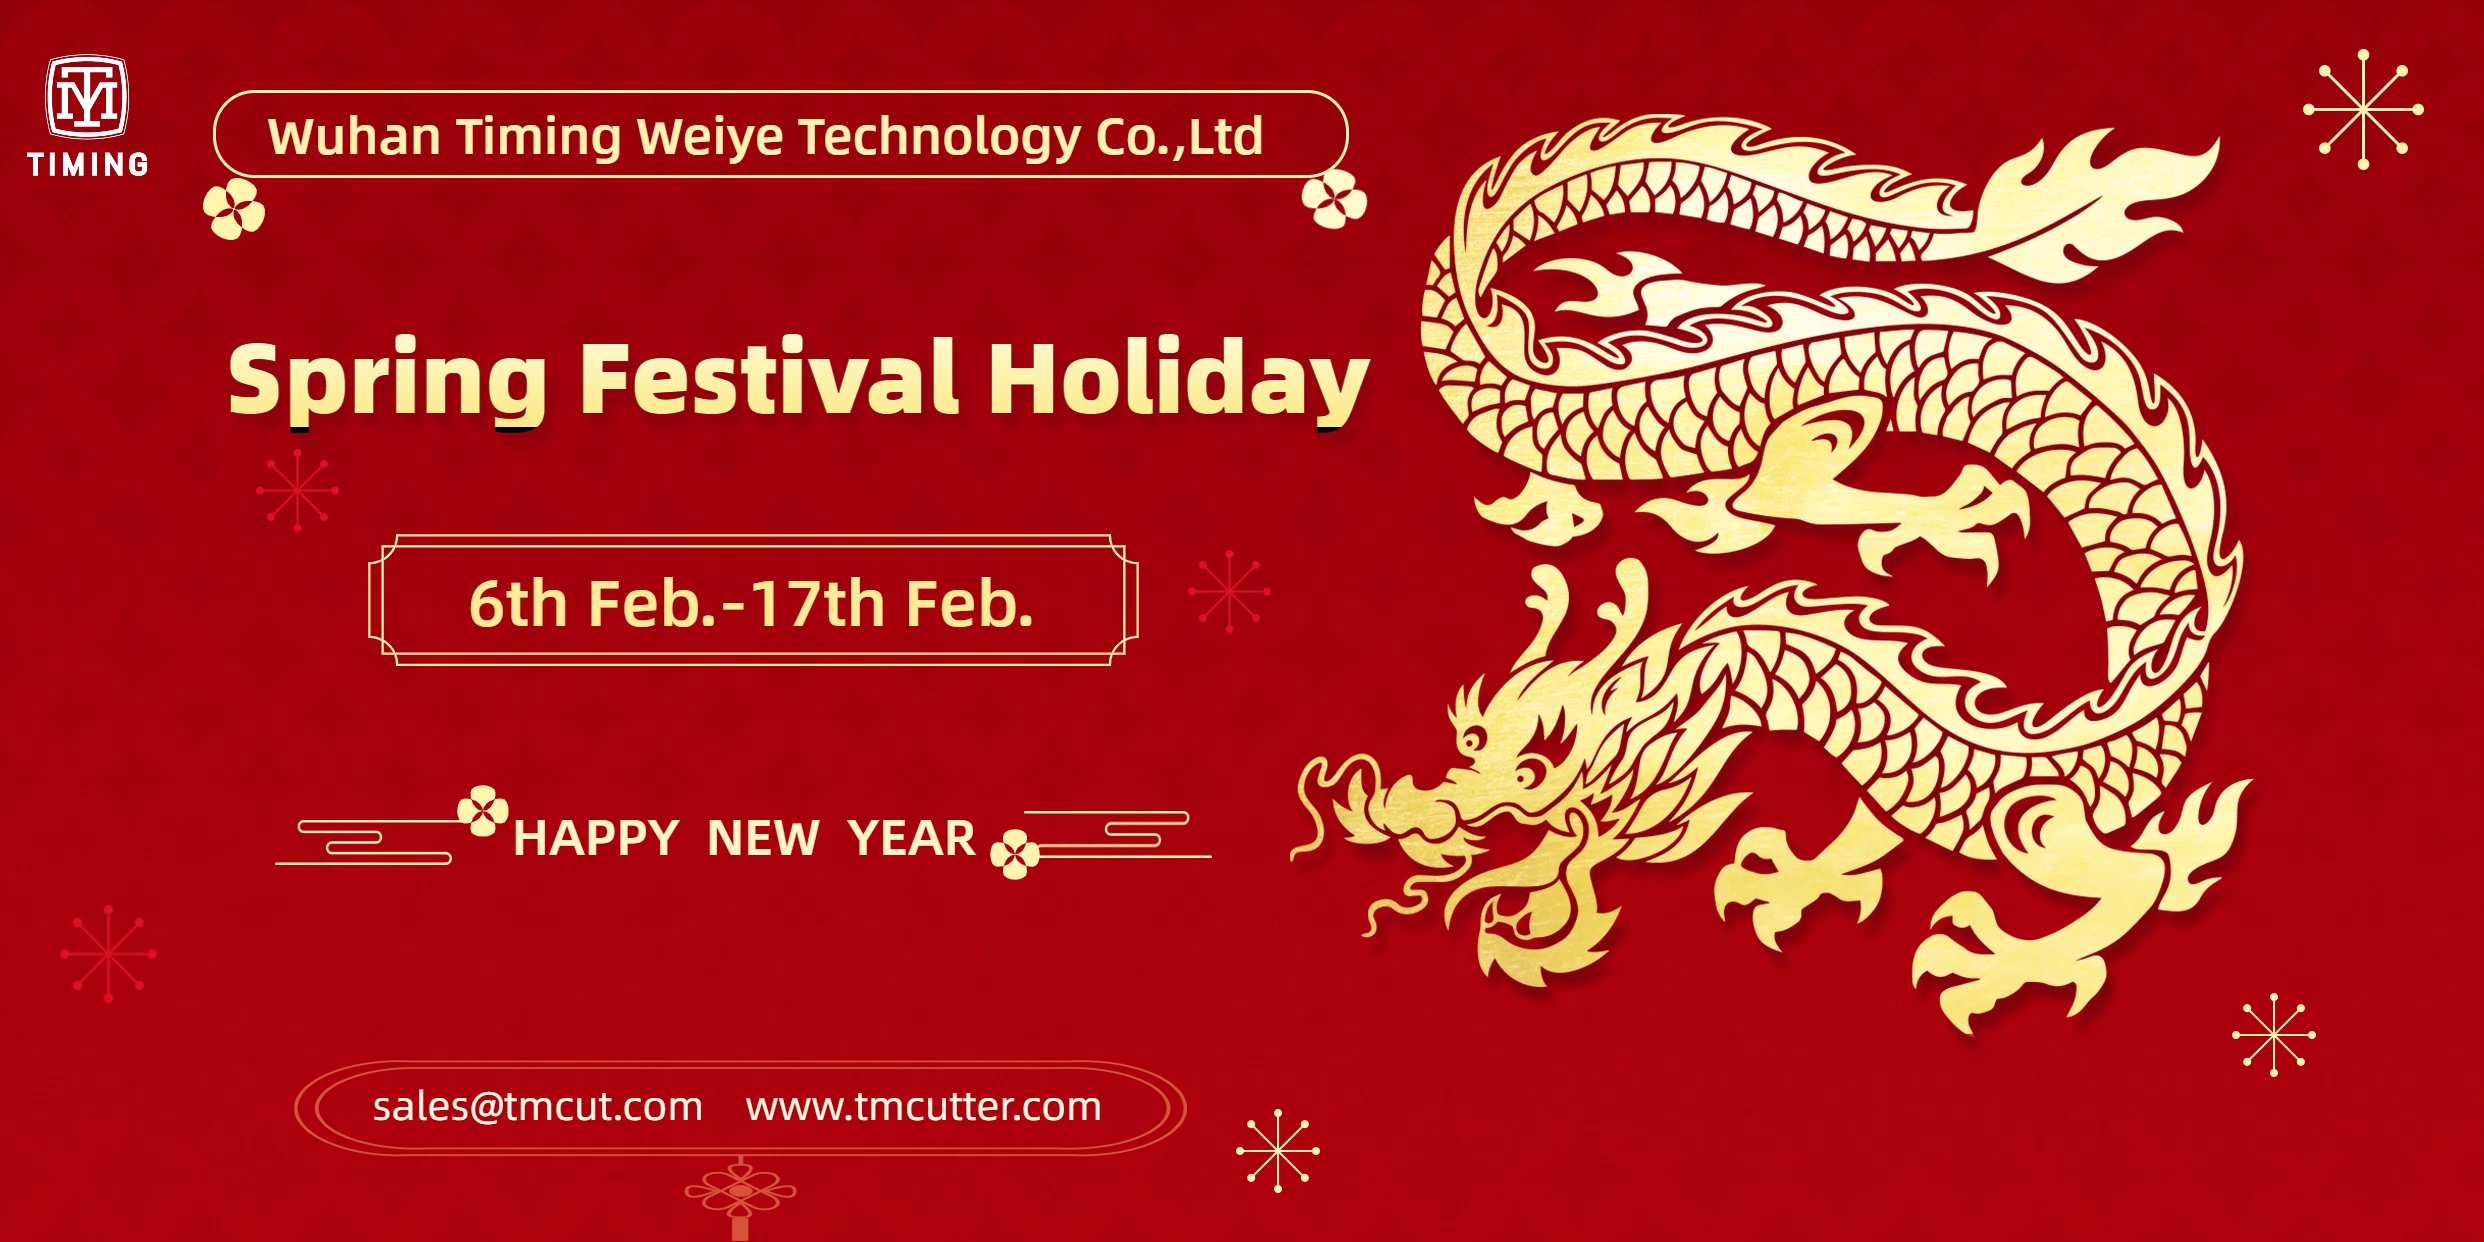 TIMING Spring Festival Holiday Notice